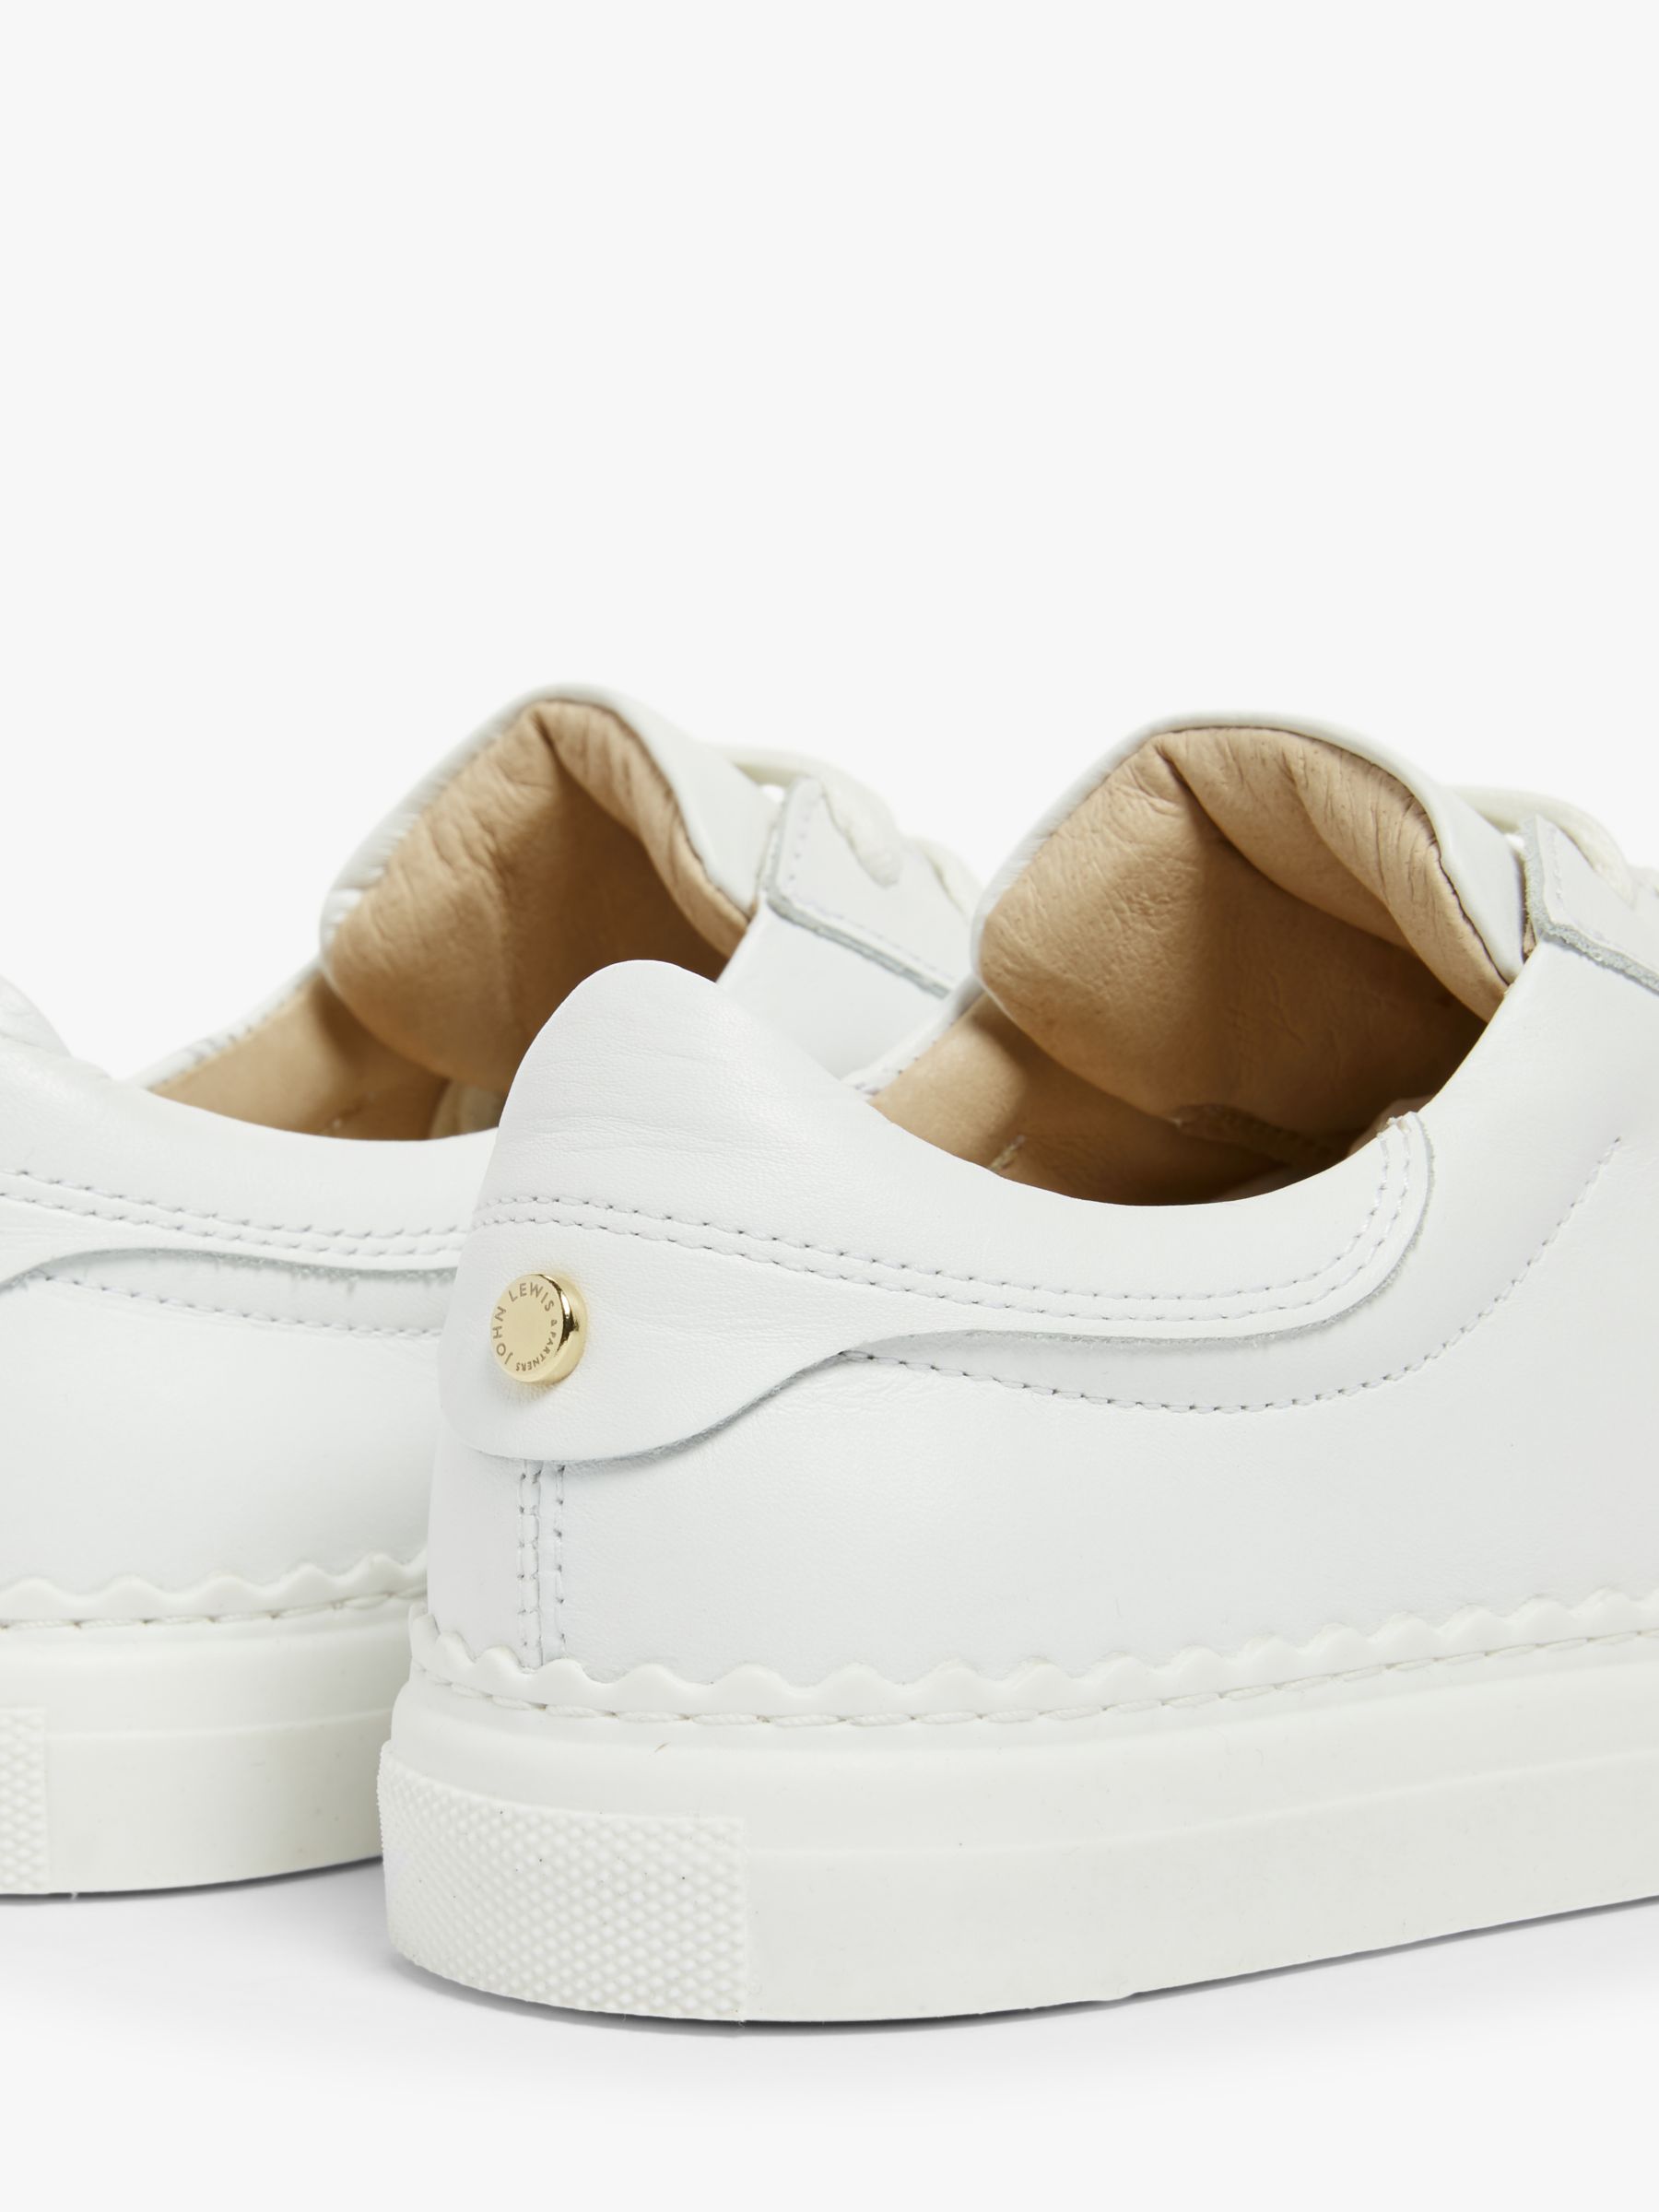 John Lewis Fiona Scalloped Detail Leather Trainers, White, 3